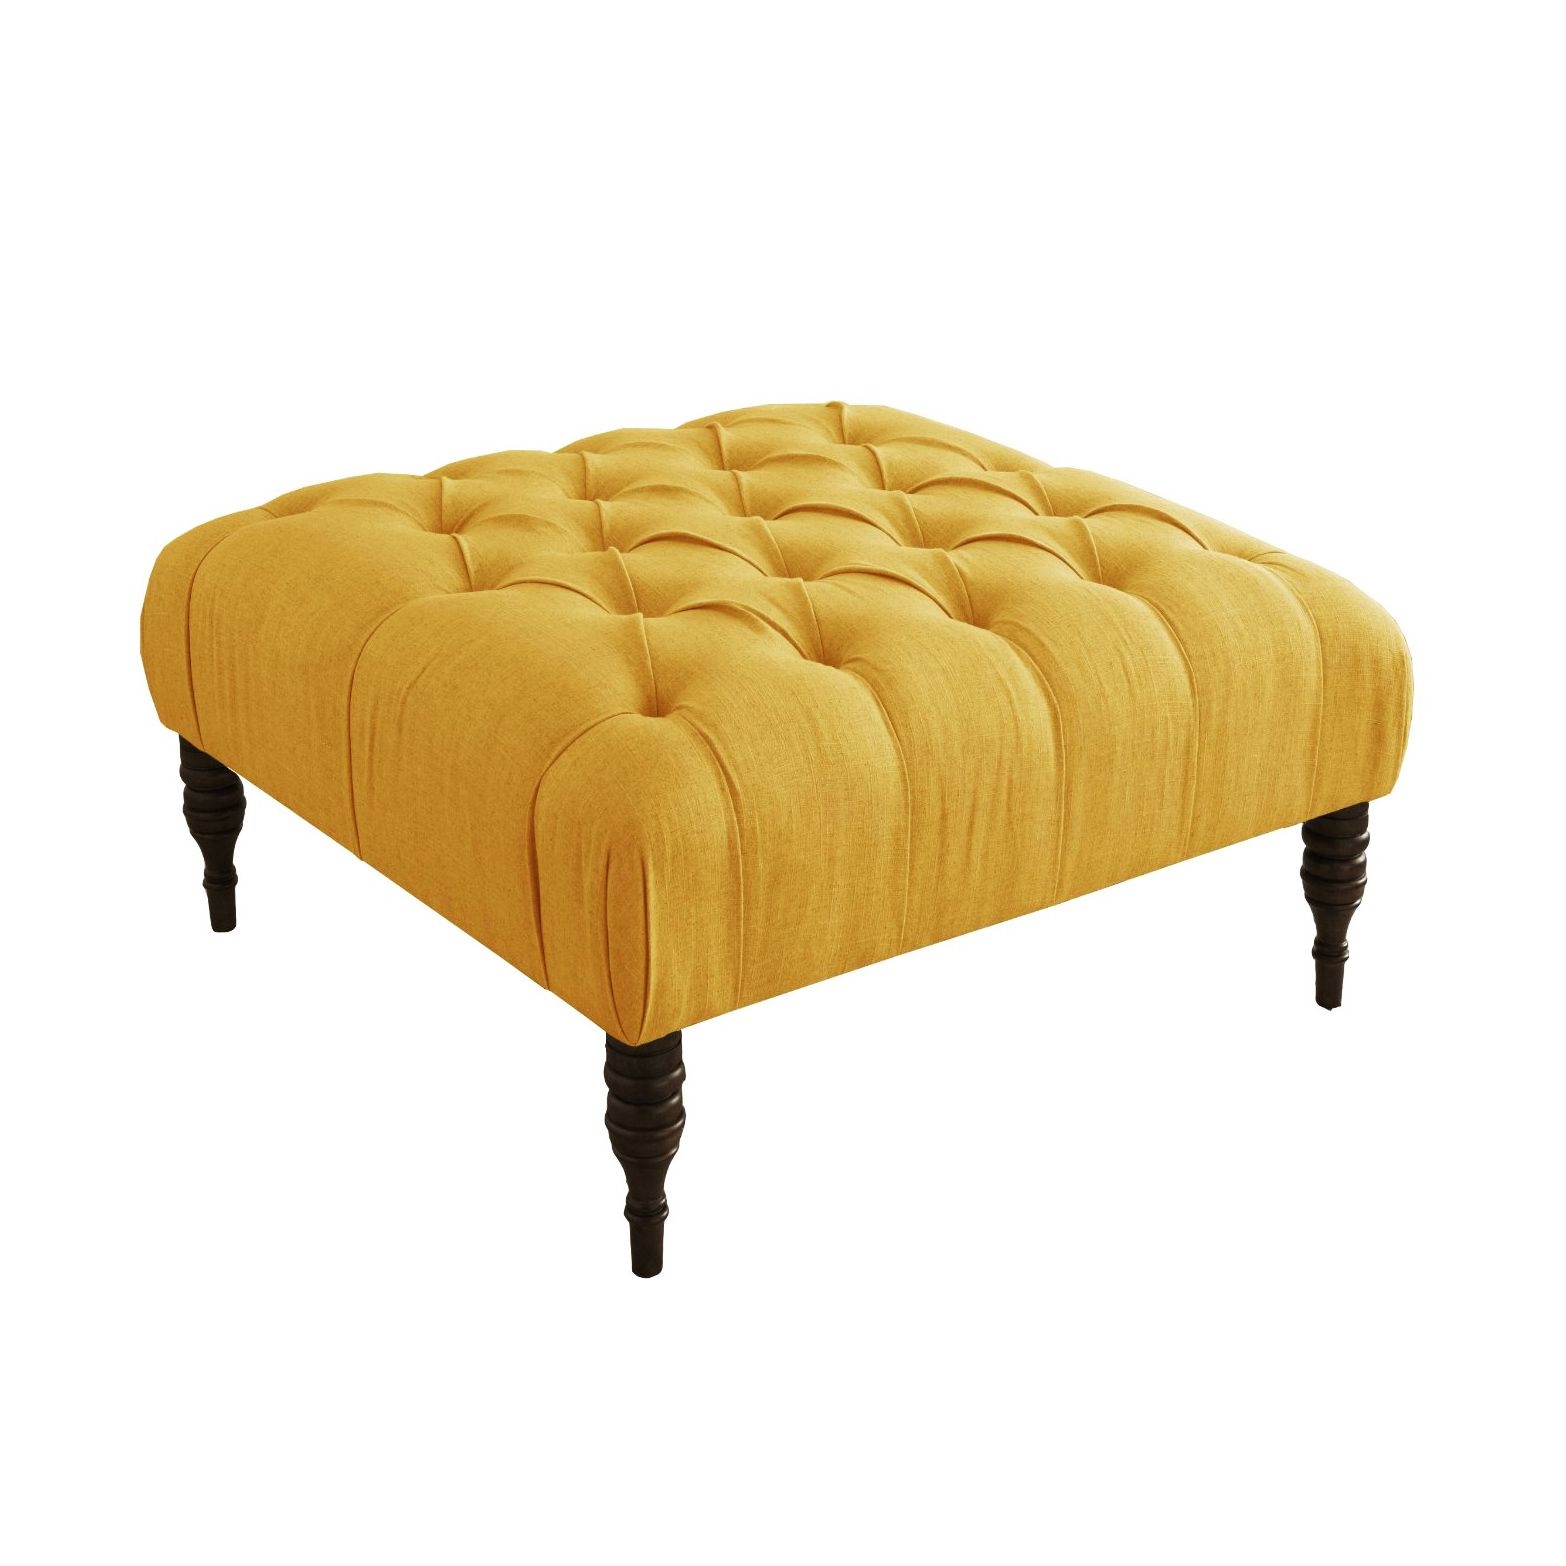 Skyline Furniture Tufted Cocktail Ottoman in Linen French Yellow